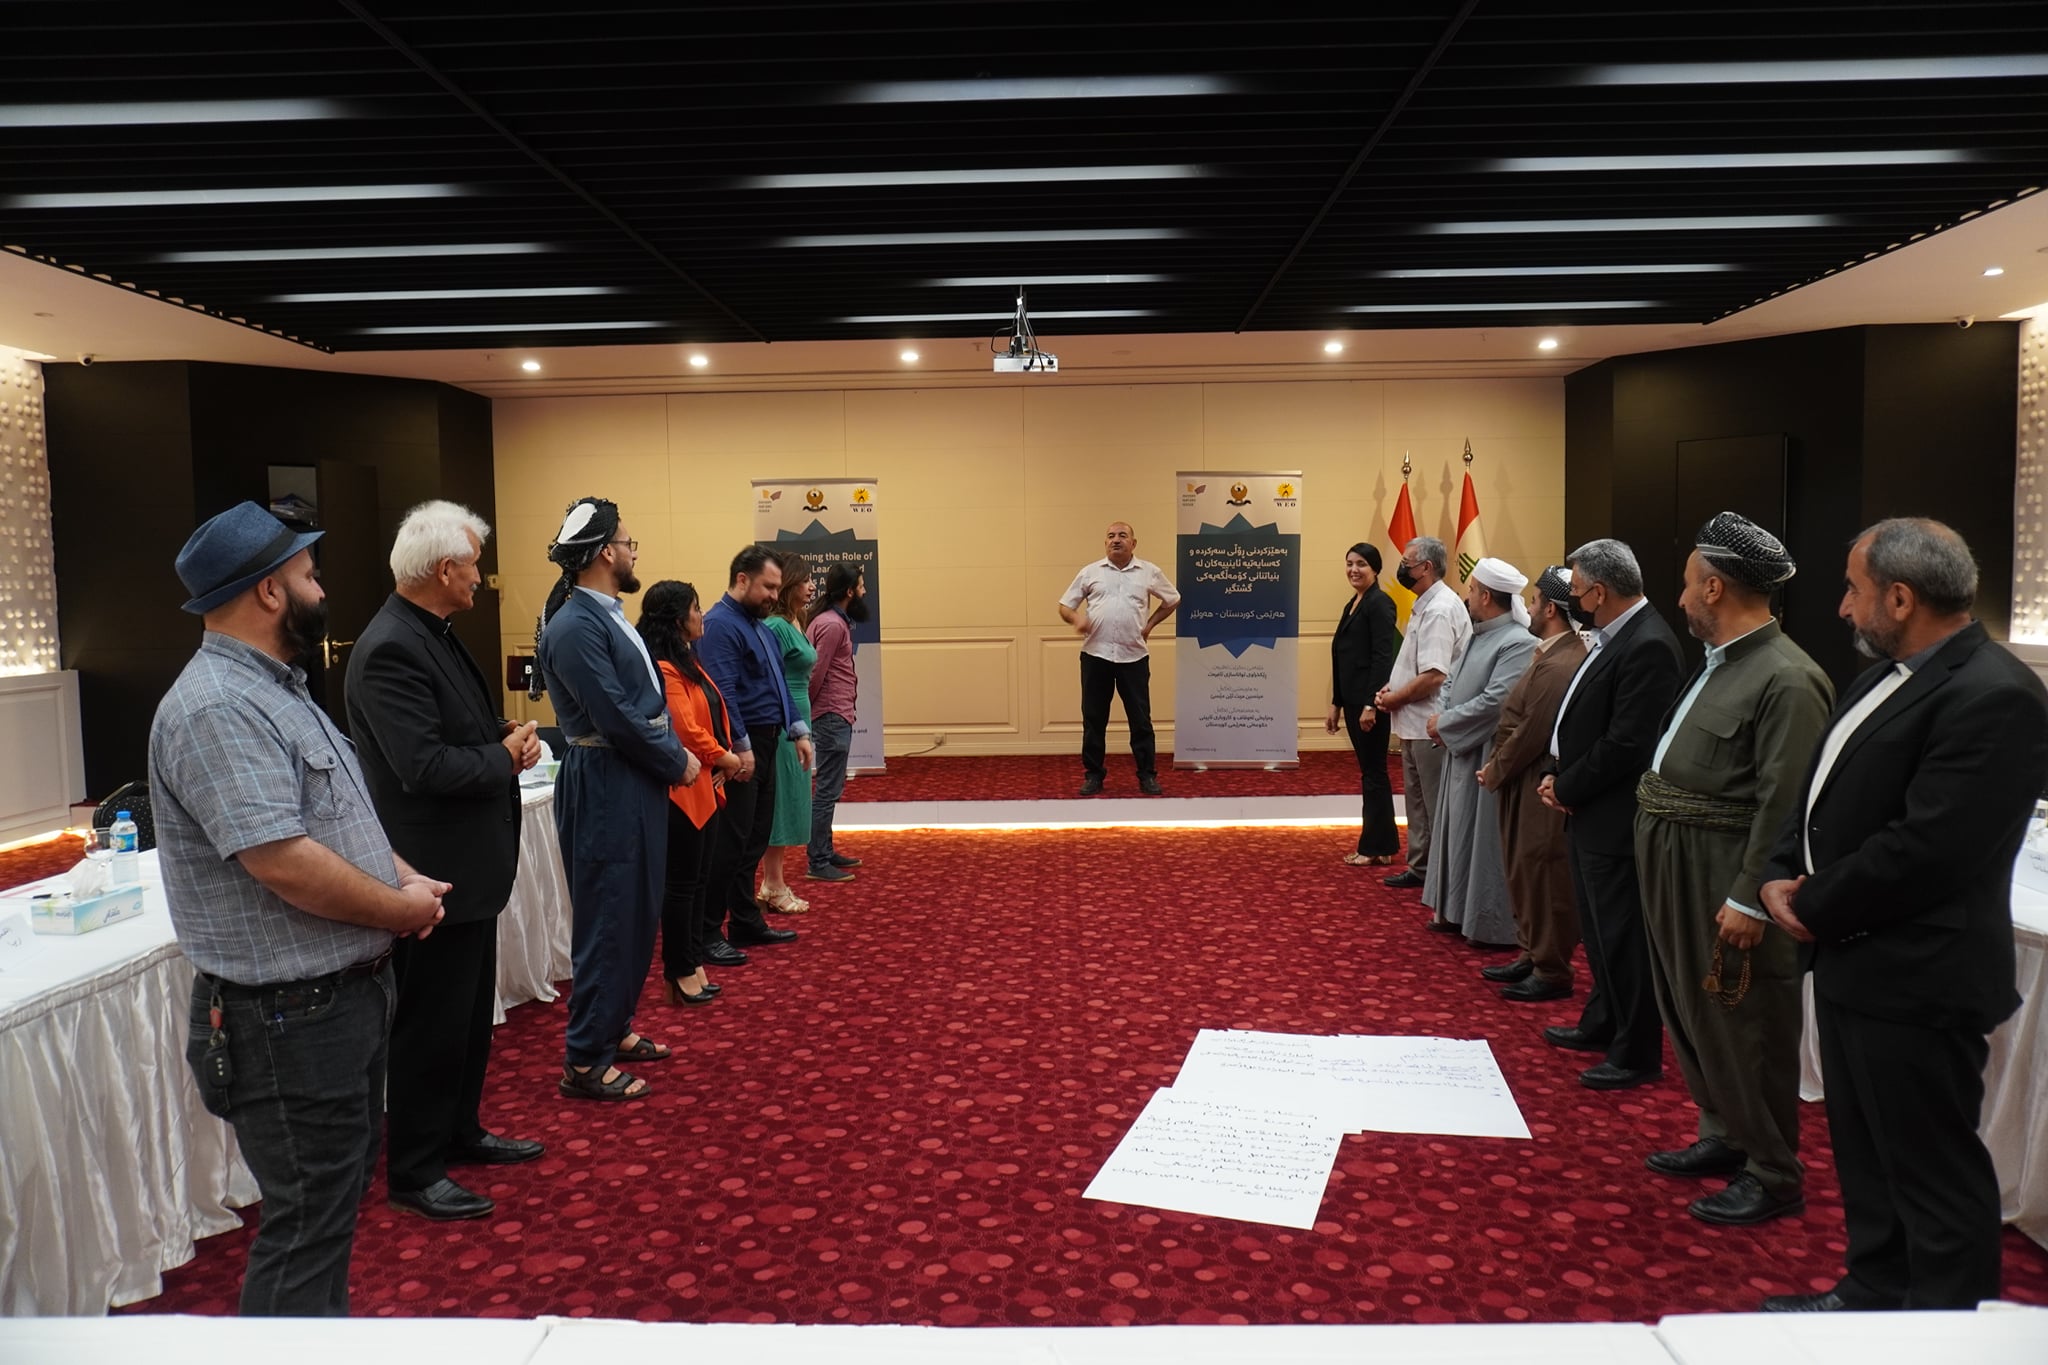 Women Empowerment Organization delivers the second workshop for the religious leaders in Erbil